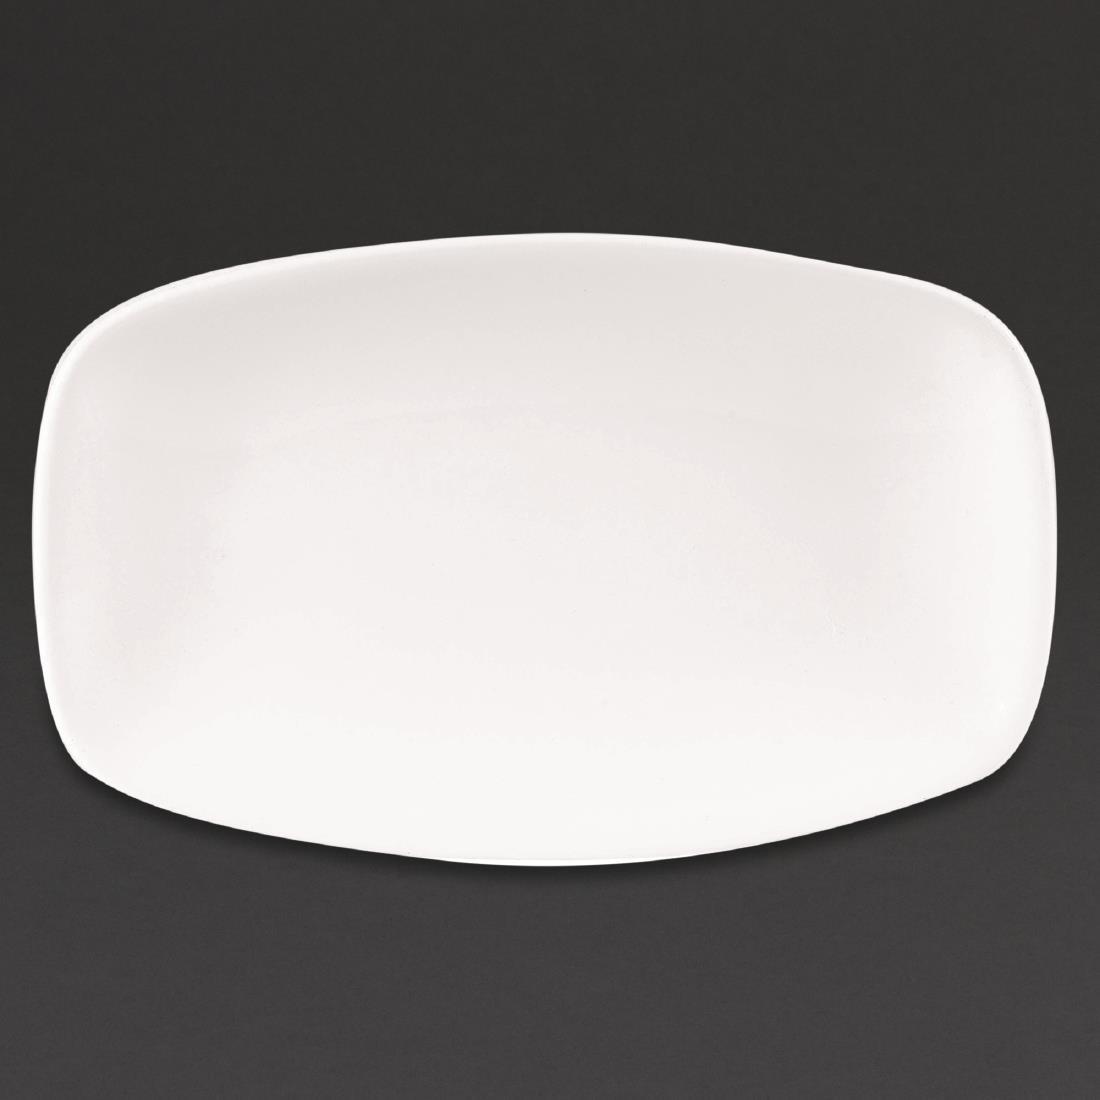 Churchill X Squared Oblong Plates White 121 x 200mm (Pack of 12) - DW345  - 1